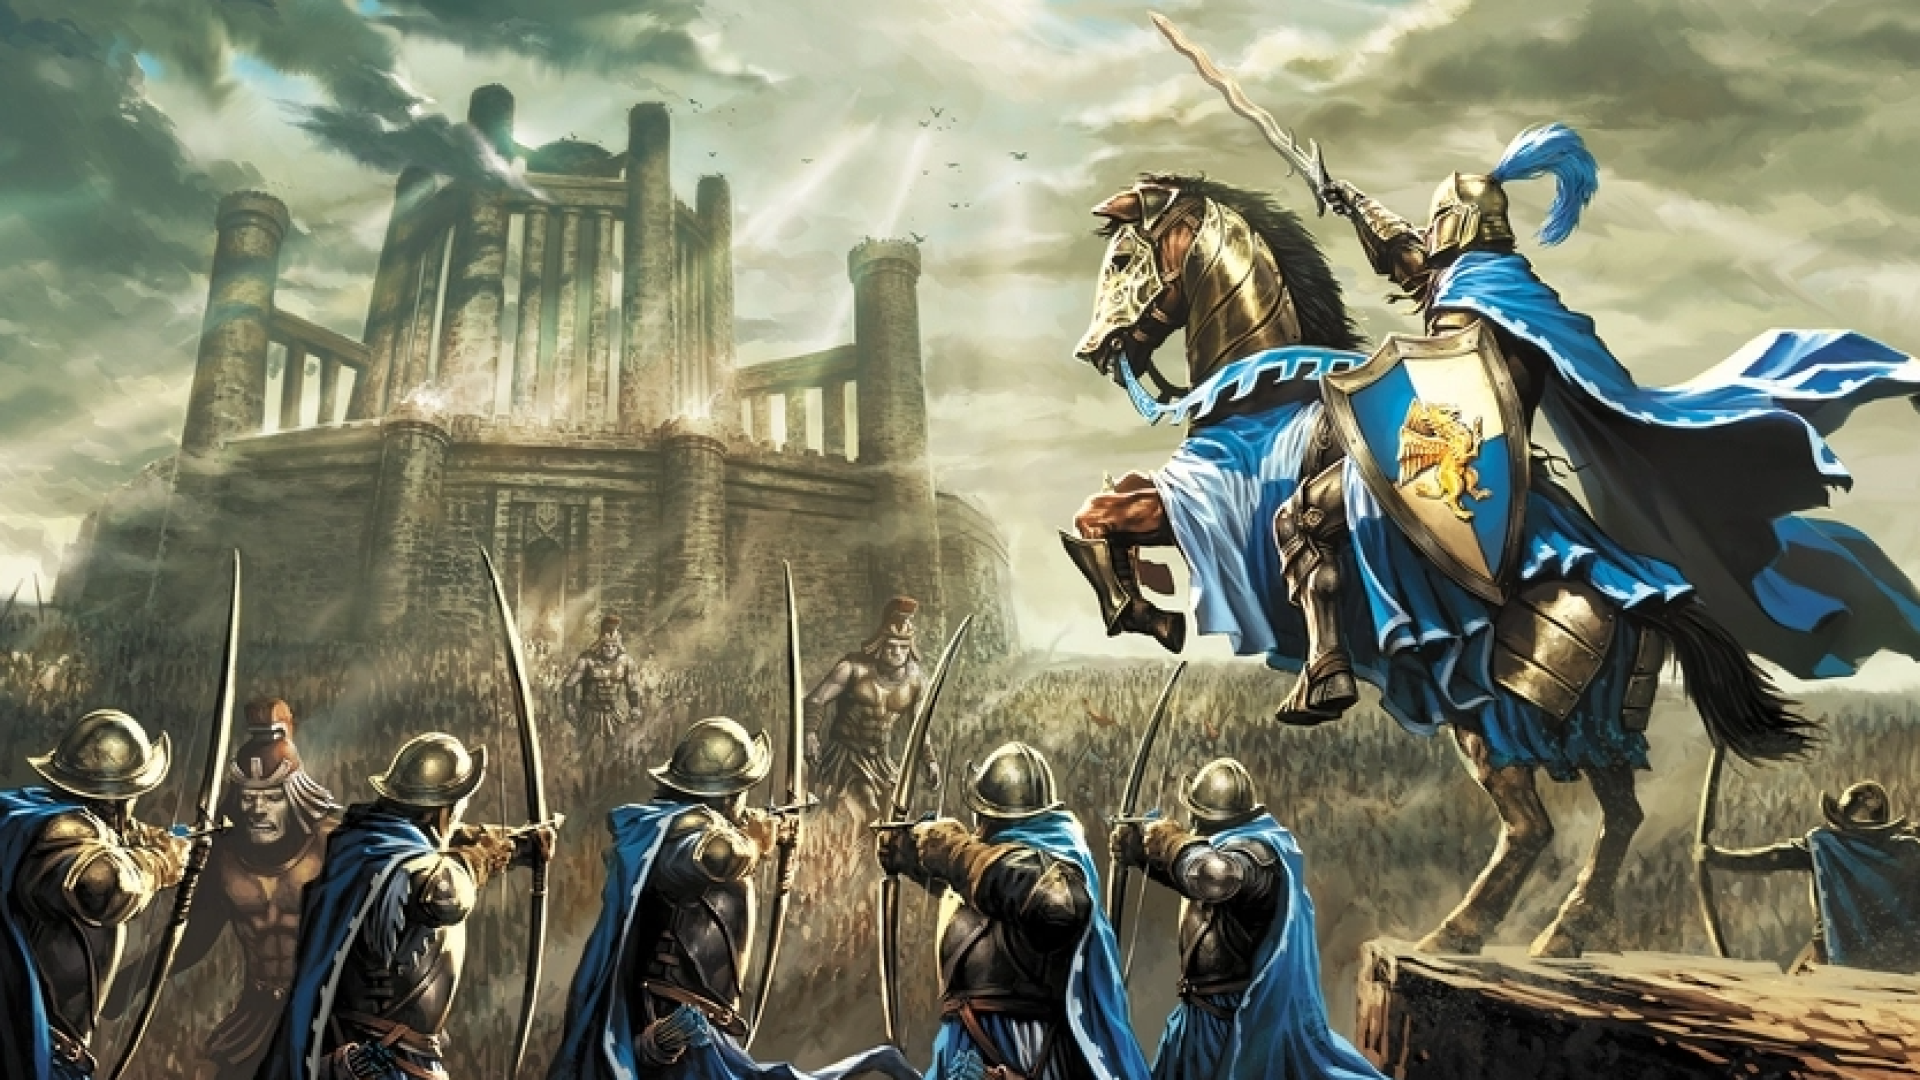 Image for Heroes of Might and Magic III gets the board game treatment from Wolfenstein studio